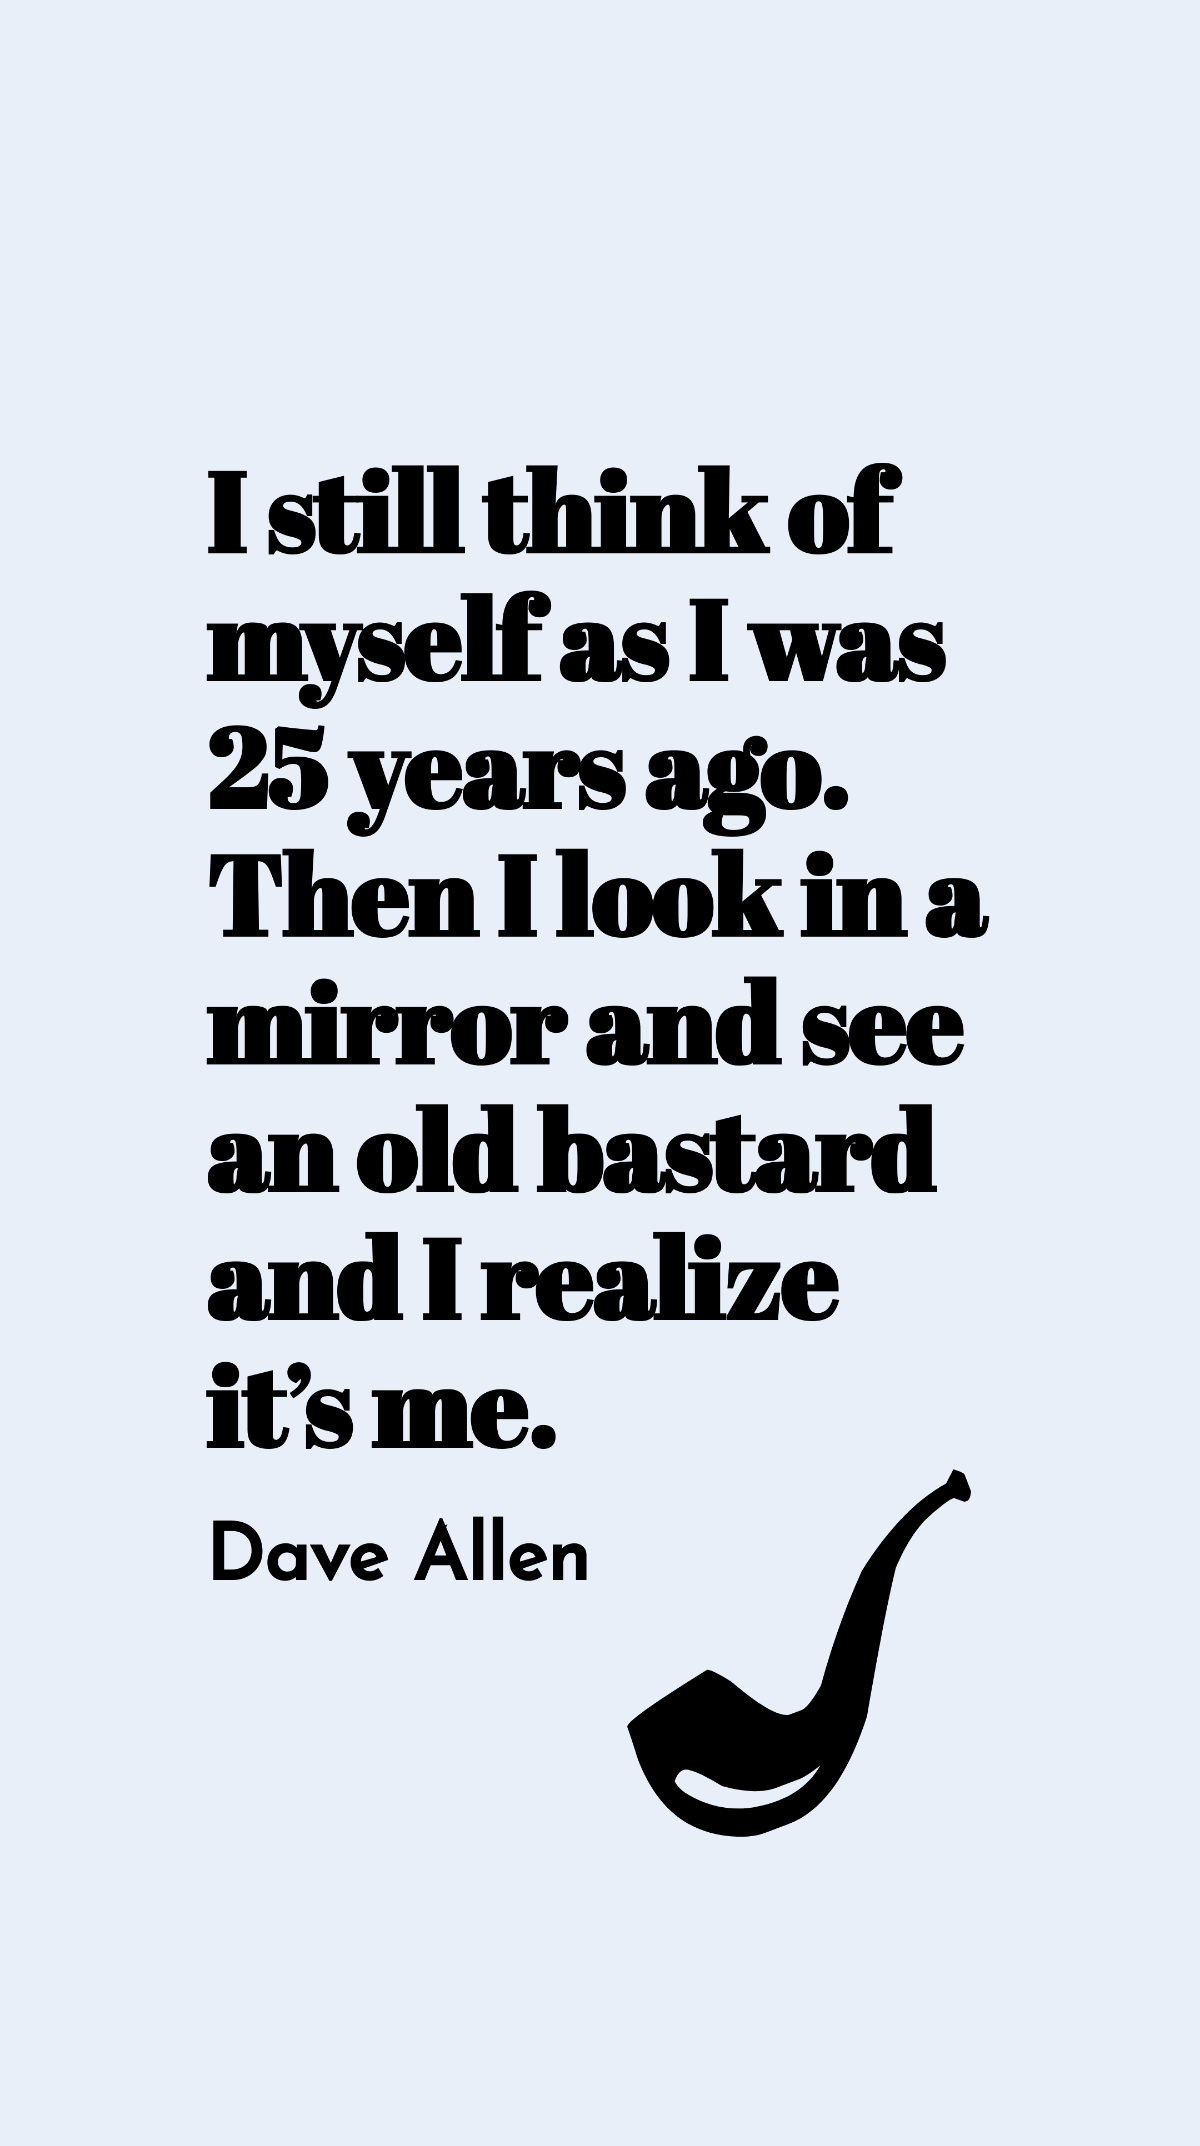 Dave Allen - I still think of myself as I was 25 years ago. Then I look in a mirror and see an old bastard and I realize it’s me. Template